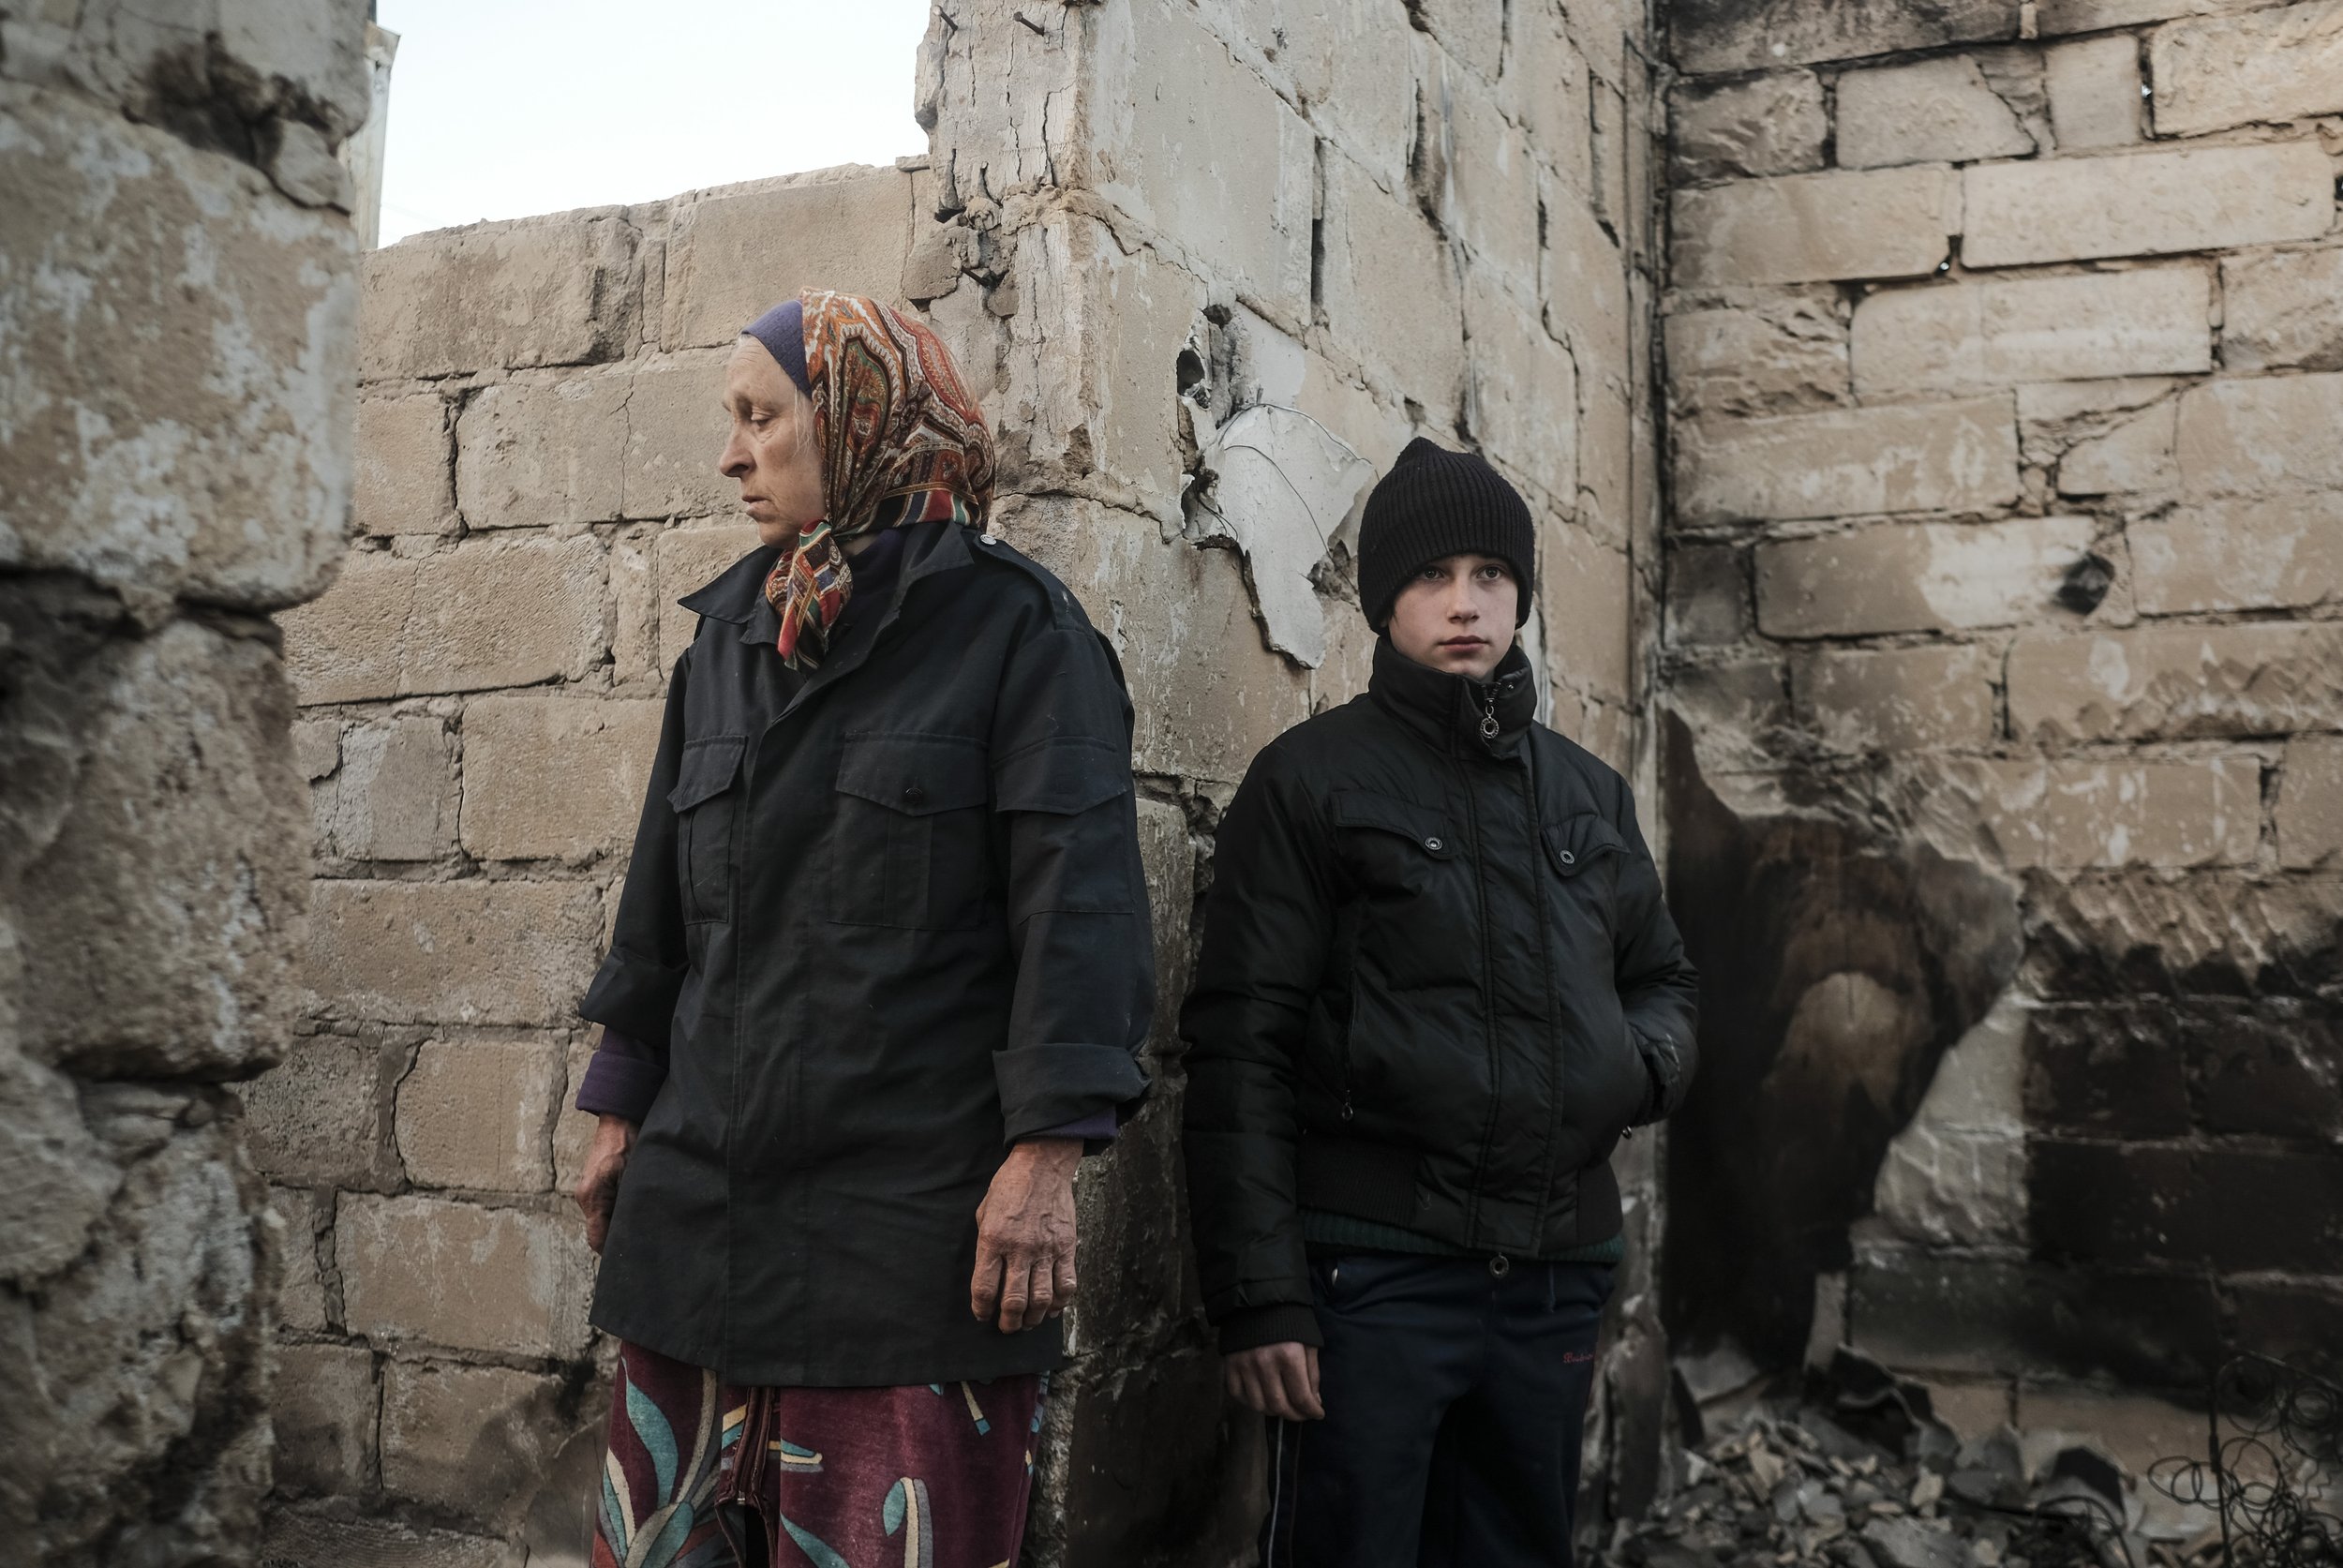  A woman and her grandson stand in the ruins of their home in Chernihiv, Ukraiine on April 15, 2022. Chernihiv, a city in the northeast of Ukraine saw heavy fighting which destroyed much of the city and its infrastructure leaving many without homes, 